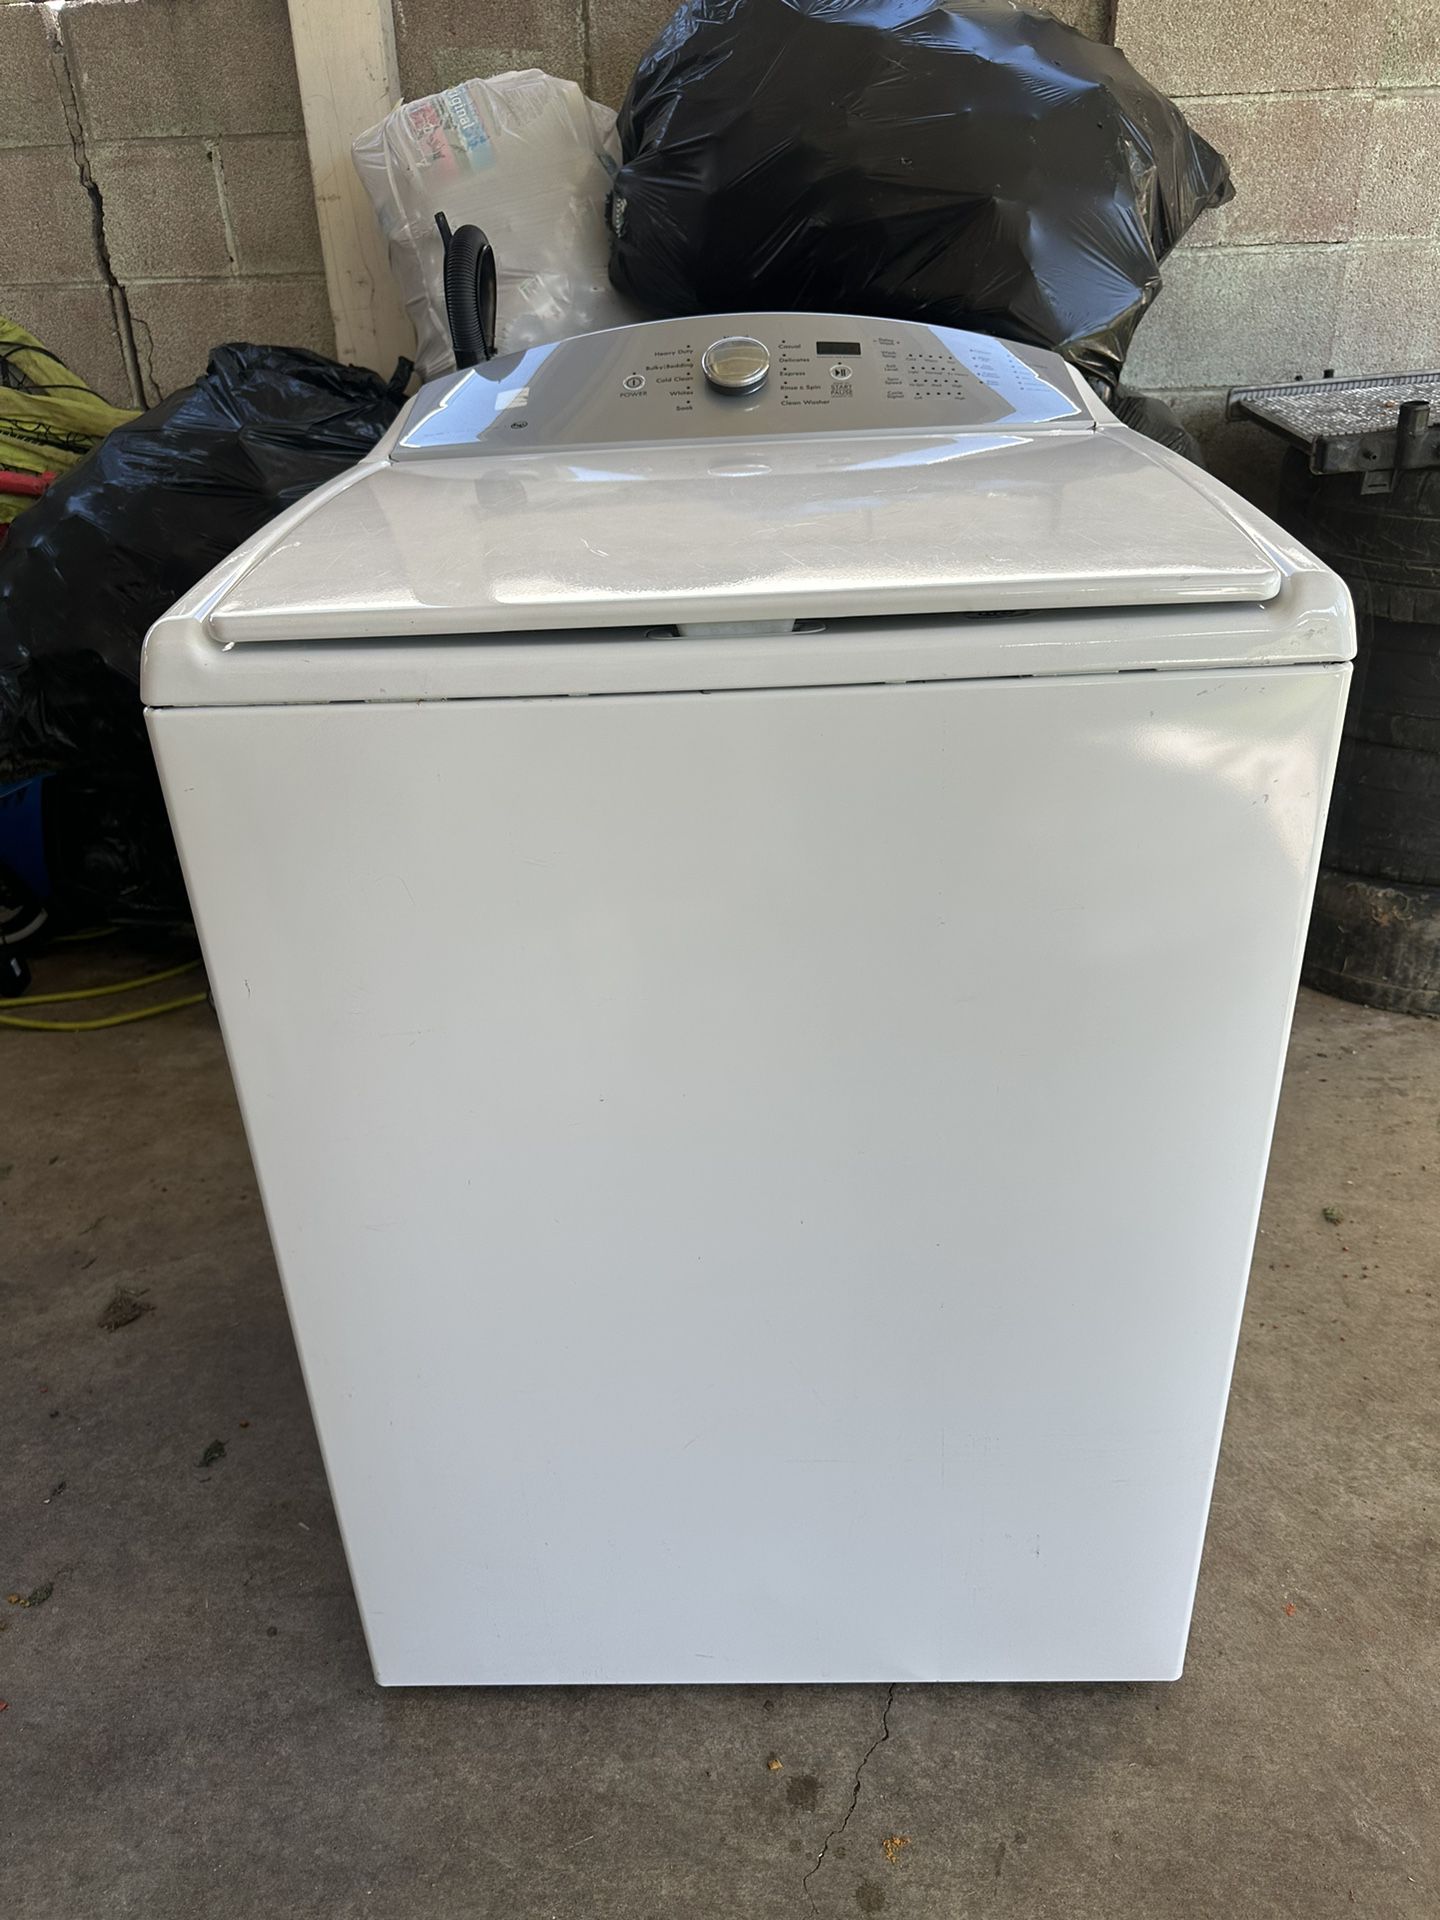 Kenmore Washer Working Good Condition!